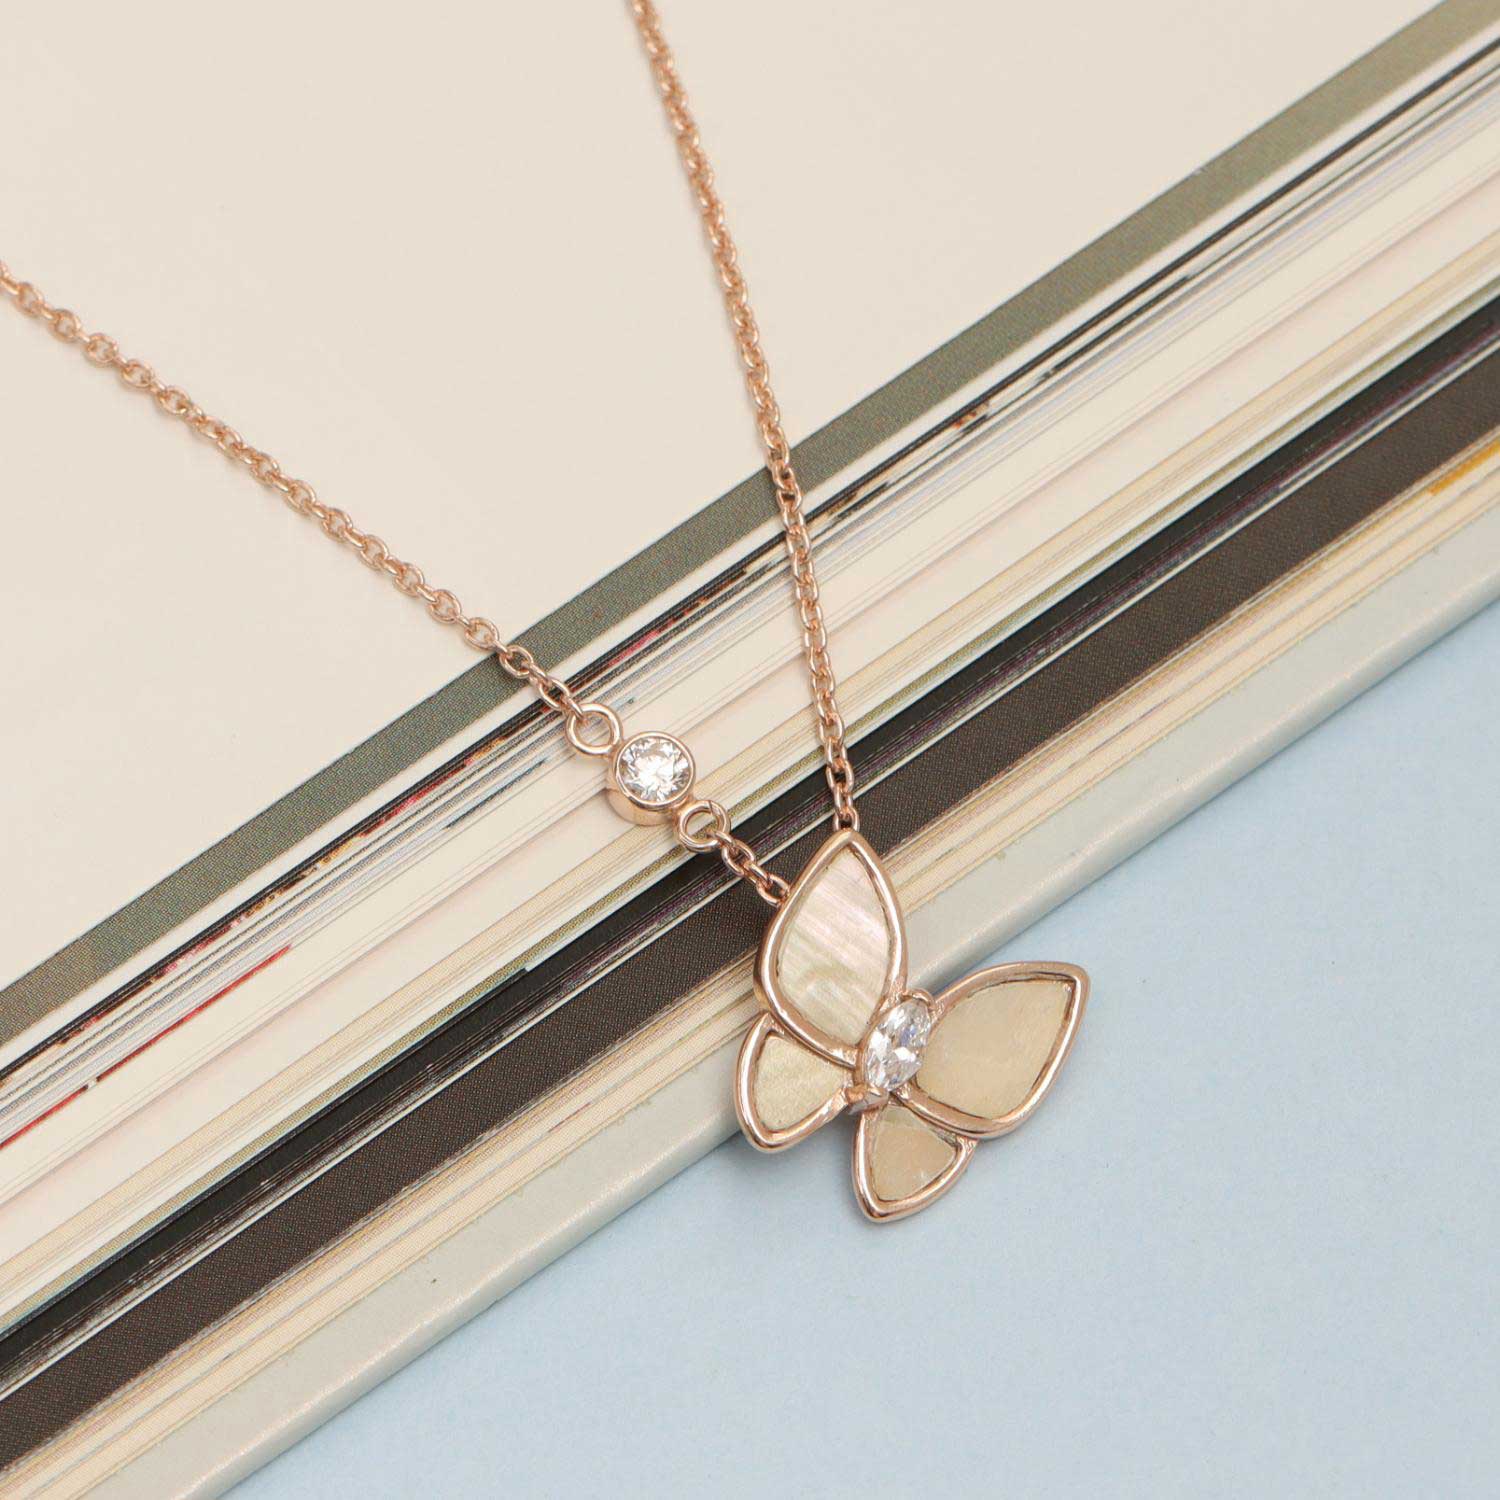 925 Sterling Silver 18K Rose Gold-Plated Mother of Pearl Butterfly Pendant Necklace for Women Teen